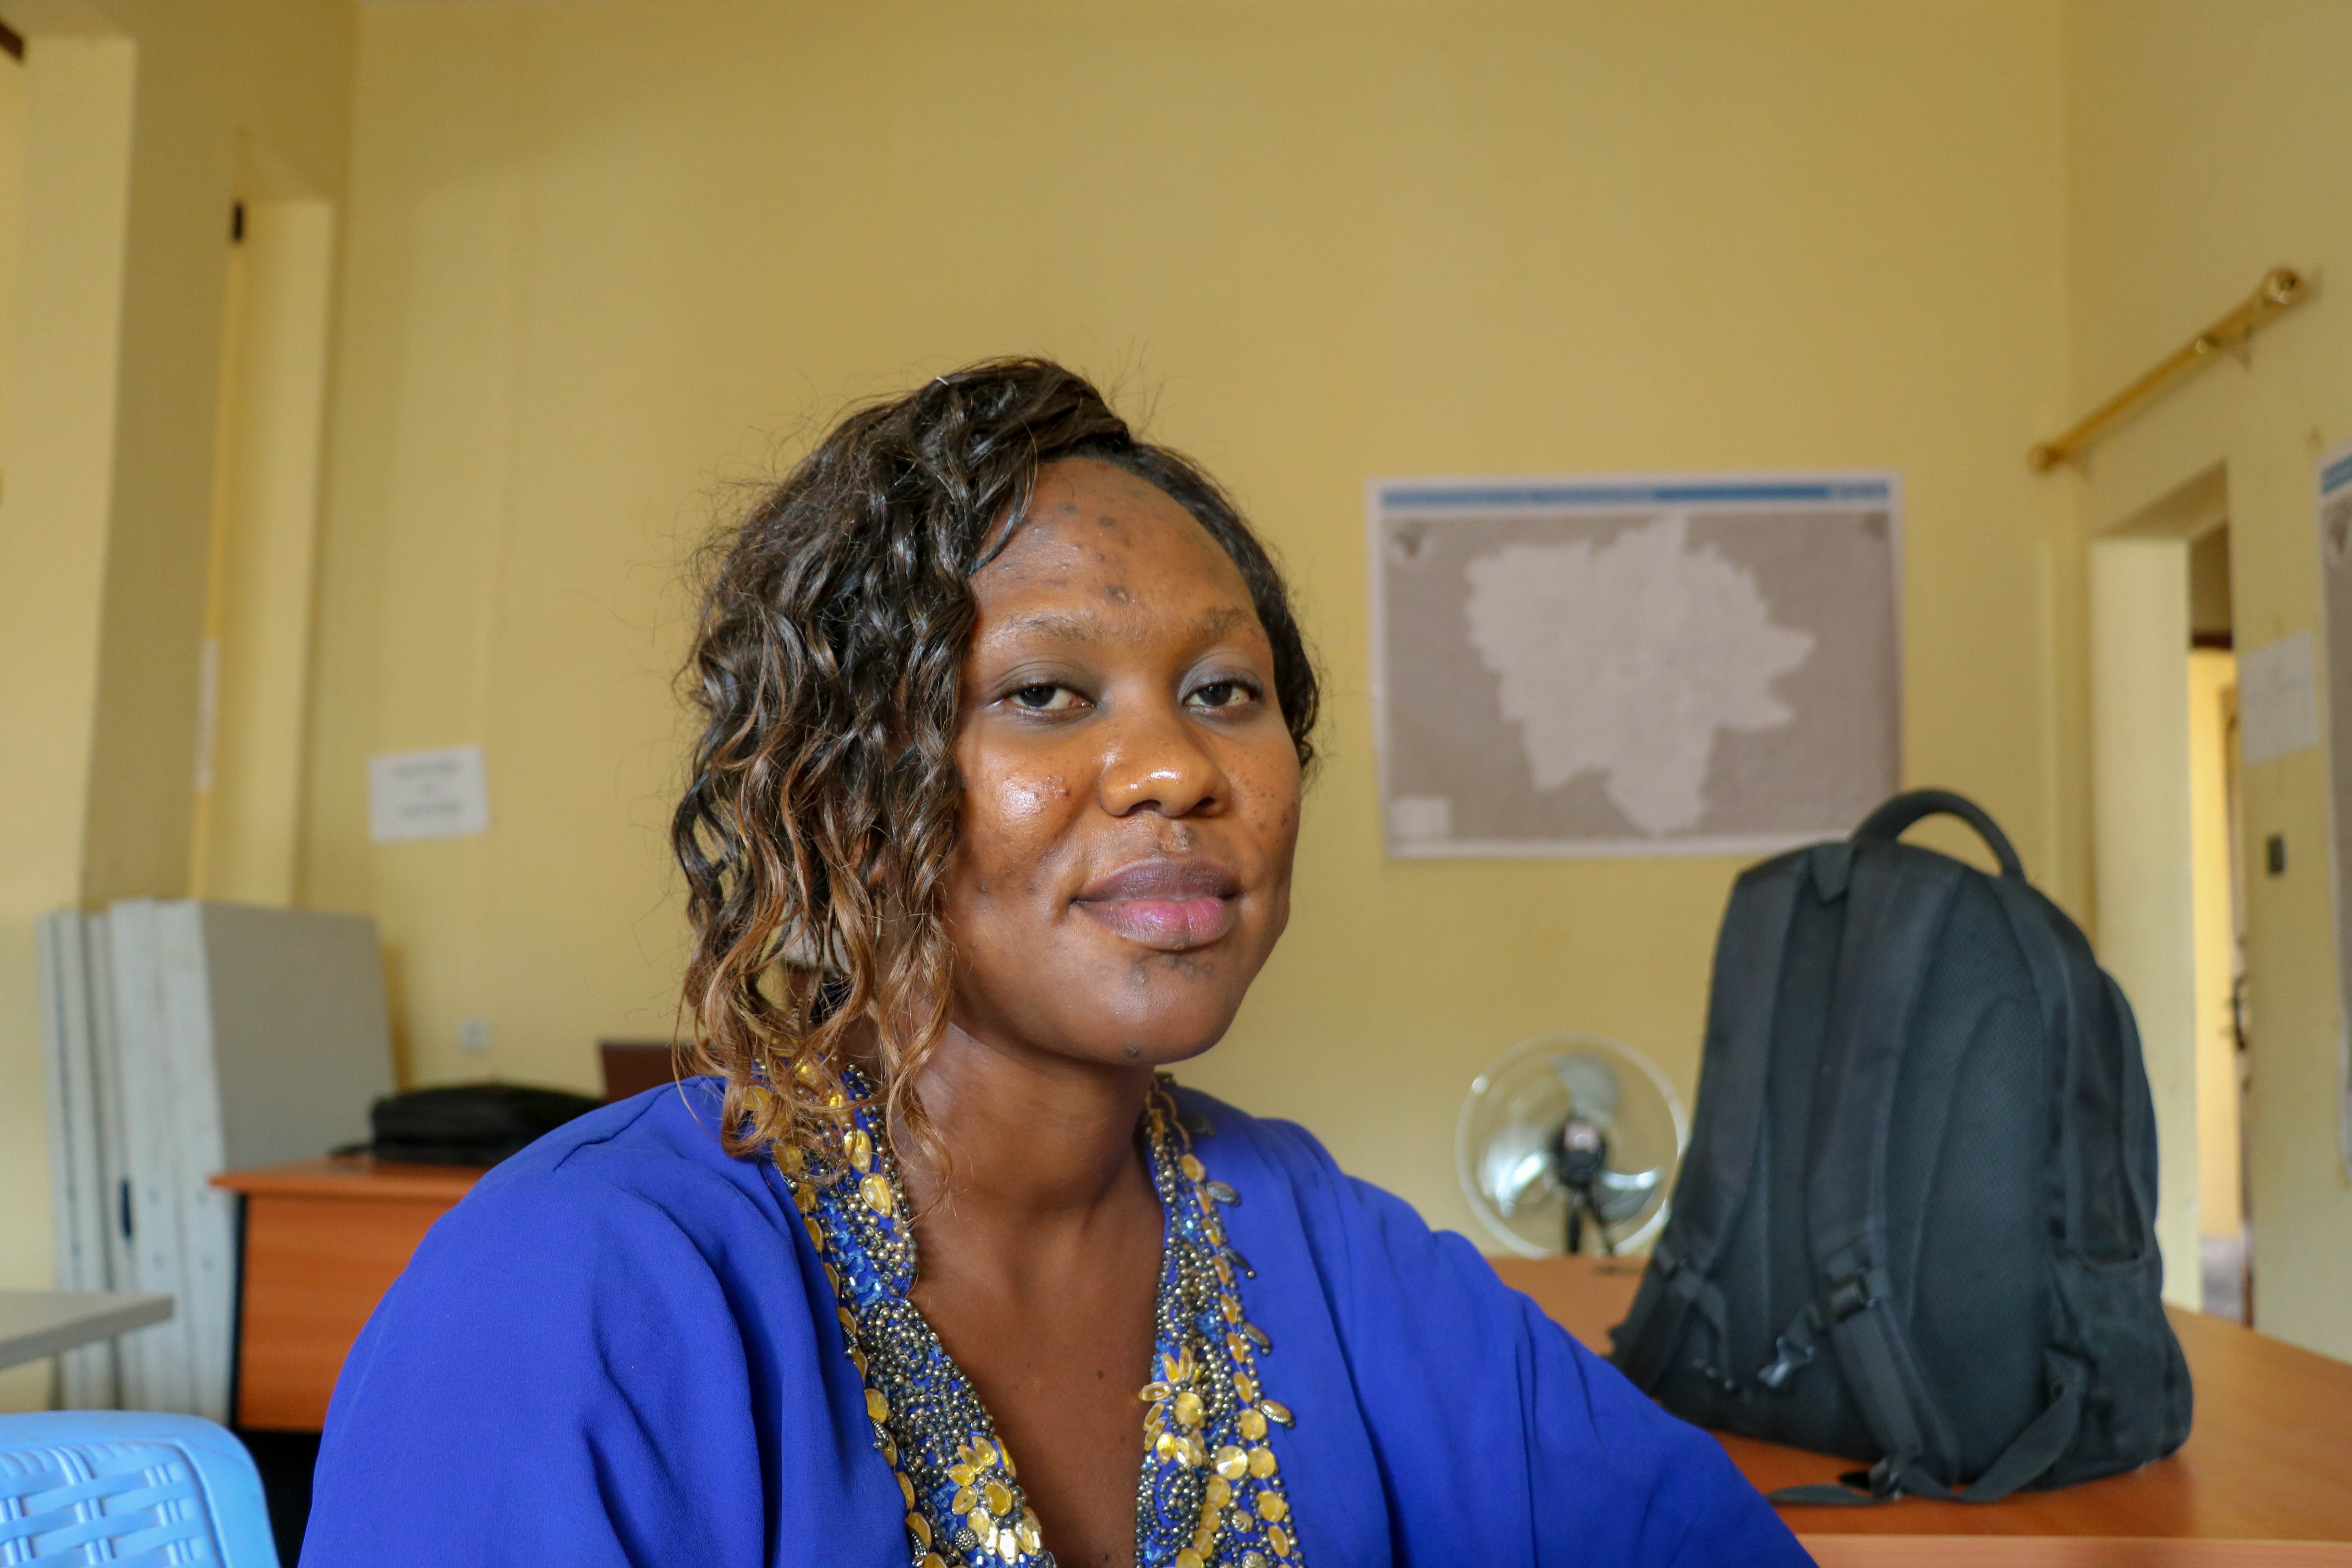 Betty is part of the Monitoring, Evaluation, Accountability and Learning team for World Vision's Kasais Emergency Response